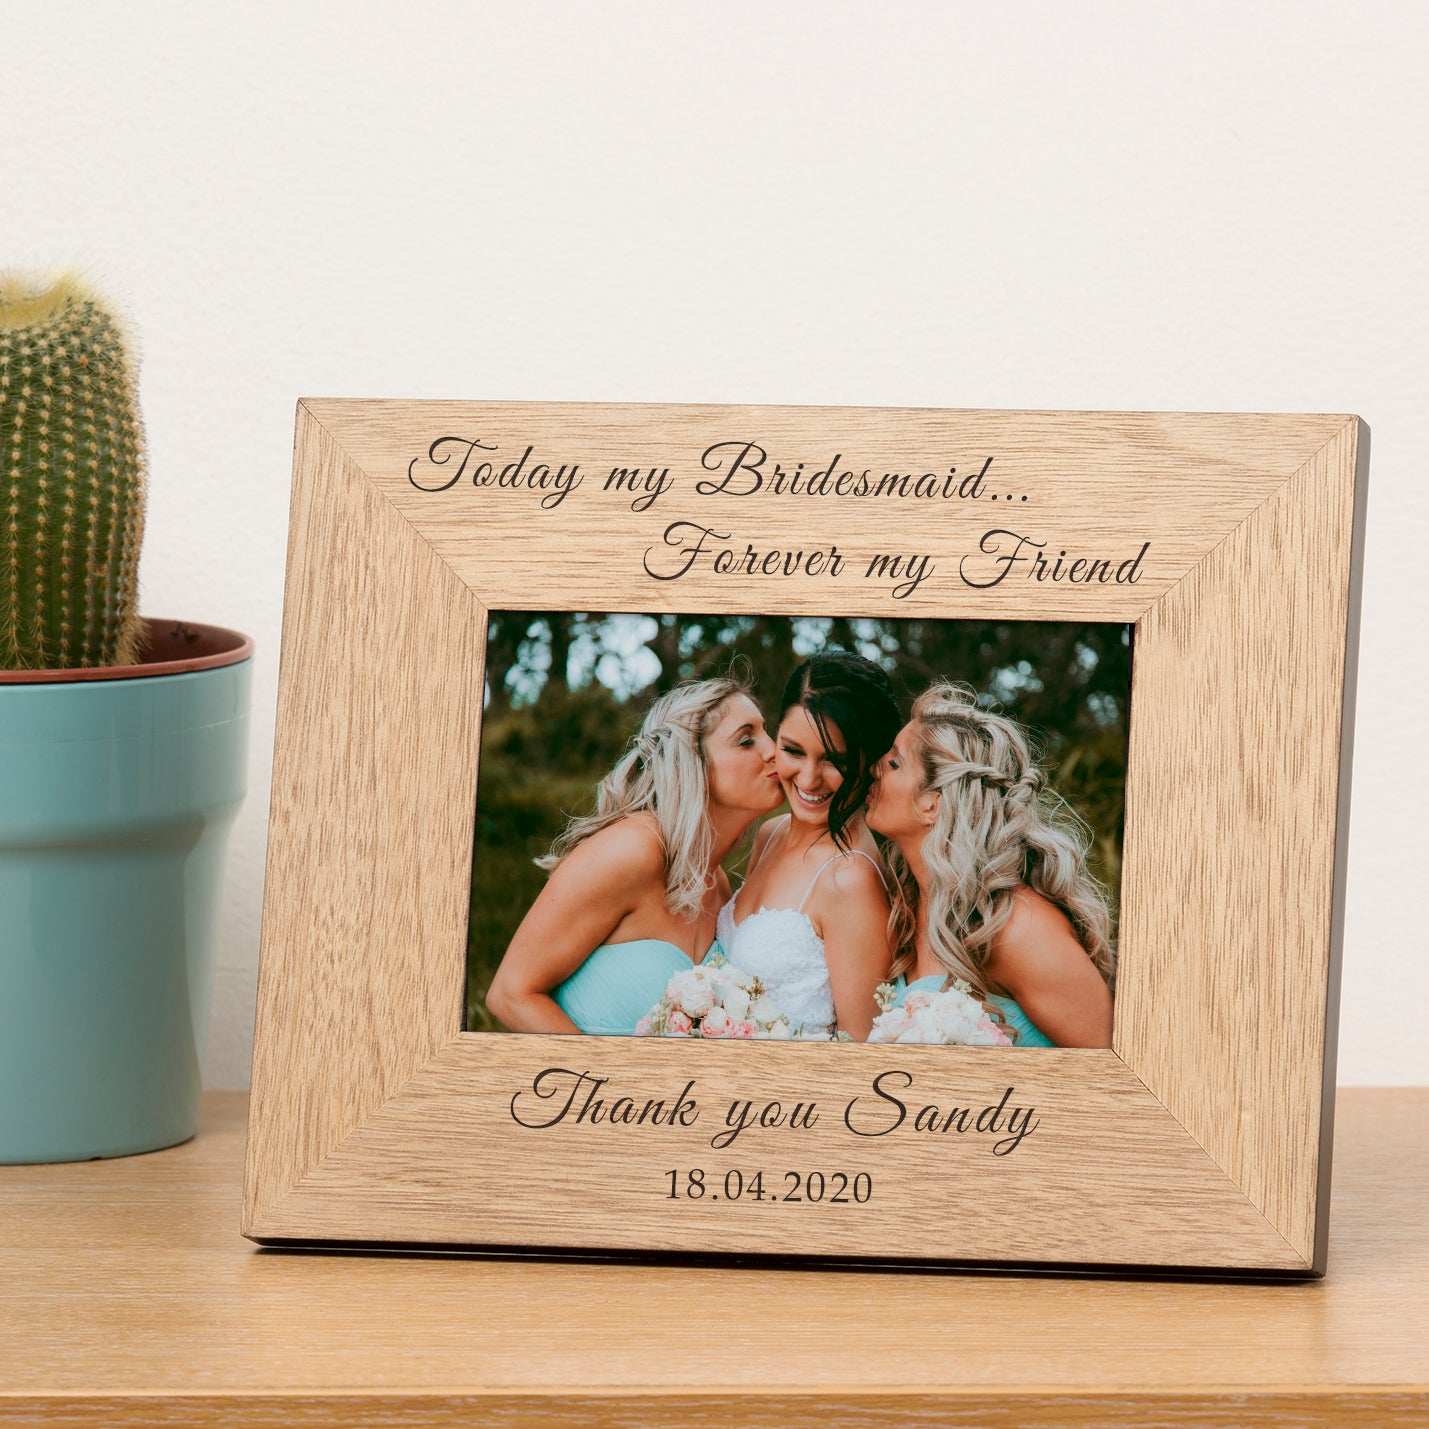 Personalised Bridesmaid Wooden Photo Frame - PCS Cufflinks & Gifts